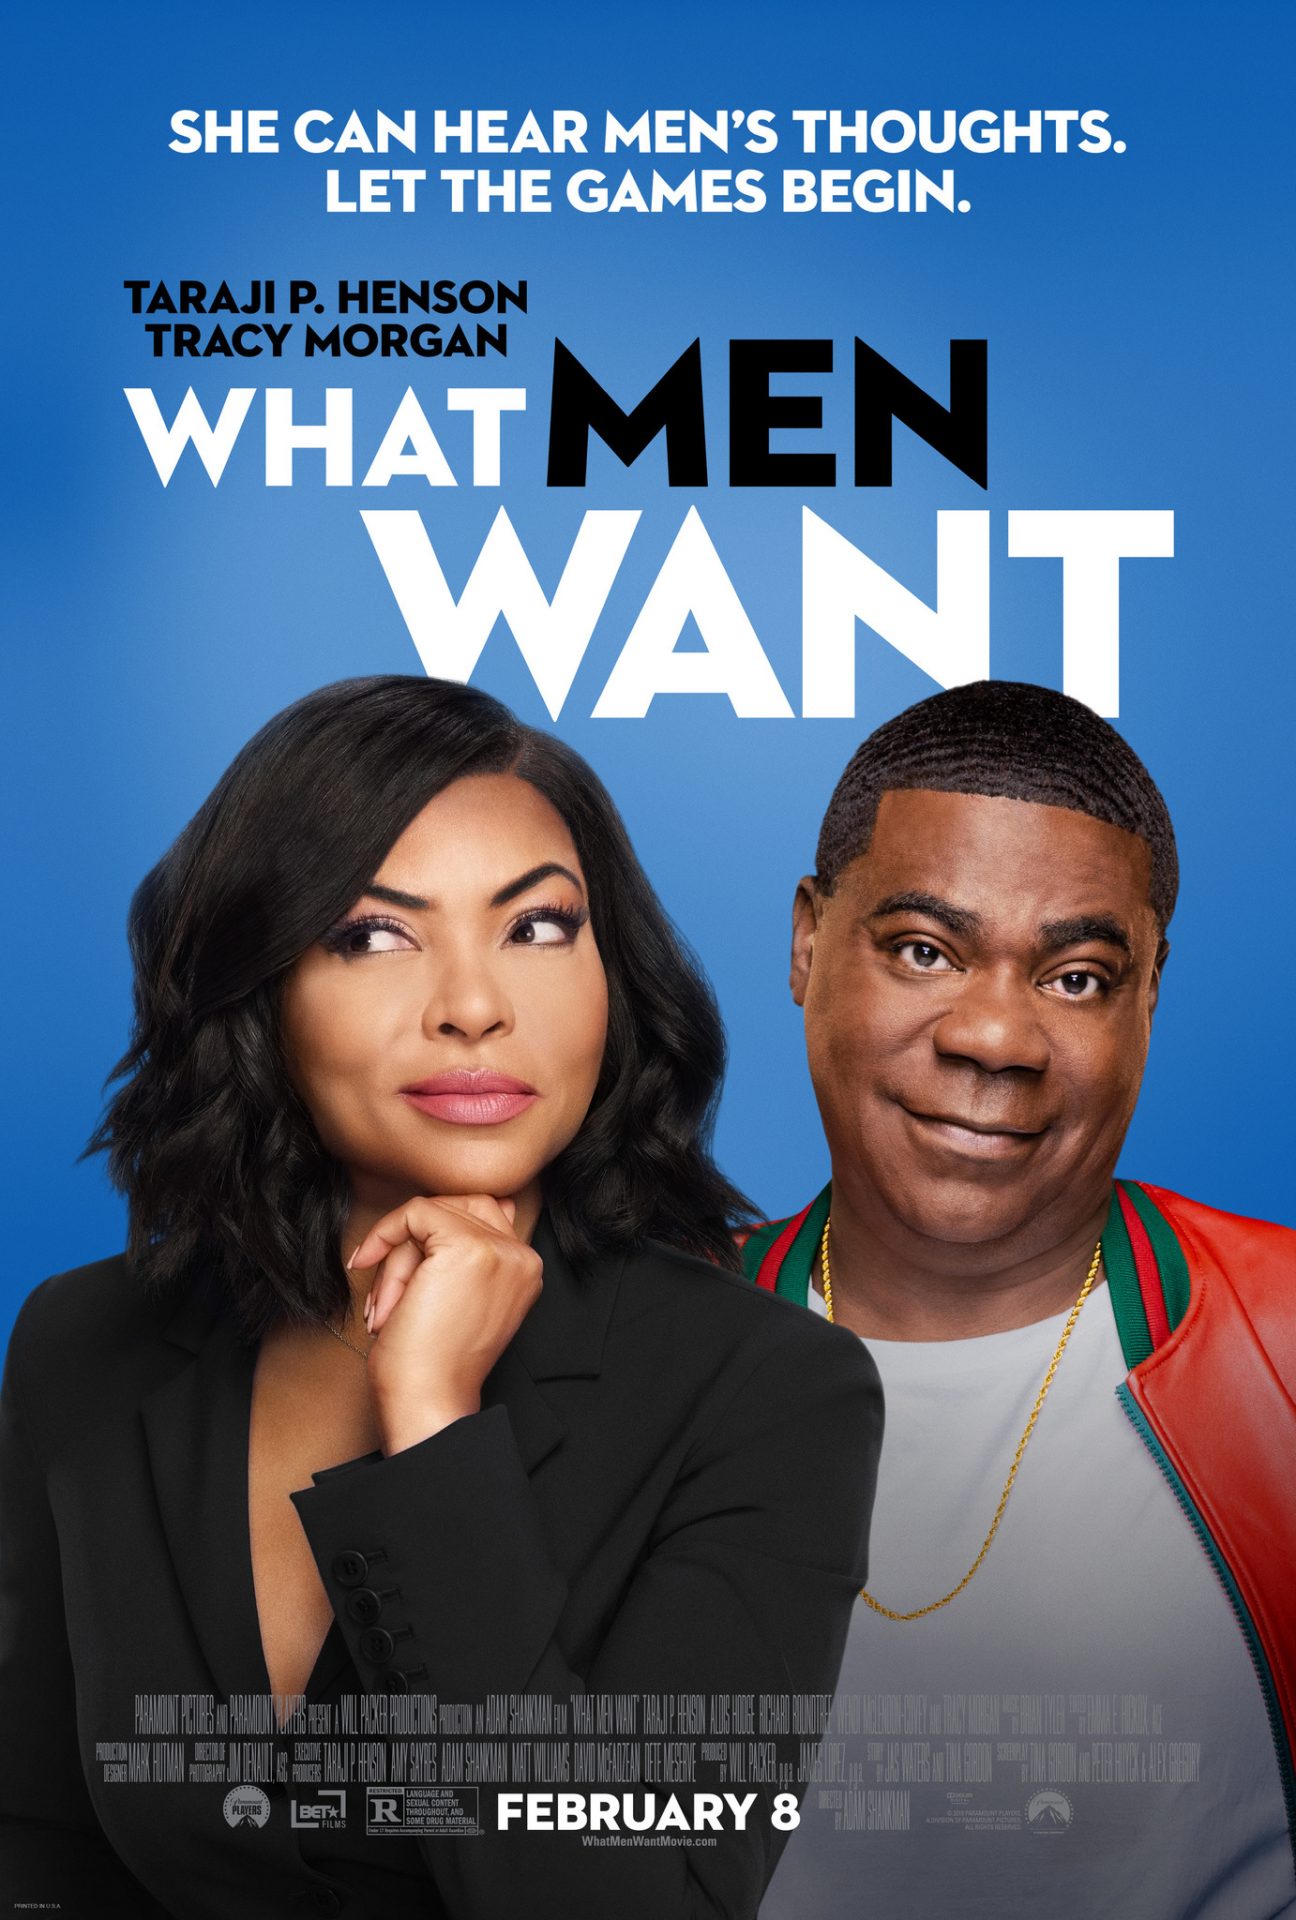 What Men Want| Movies About & Relating To Sports | SPMA Shelf